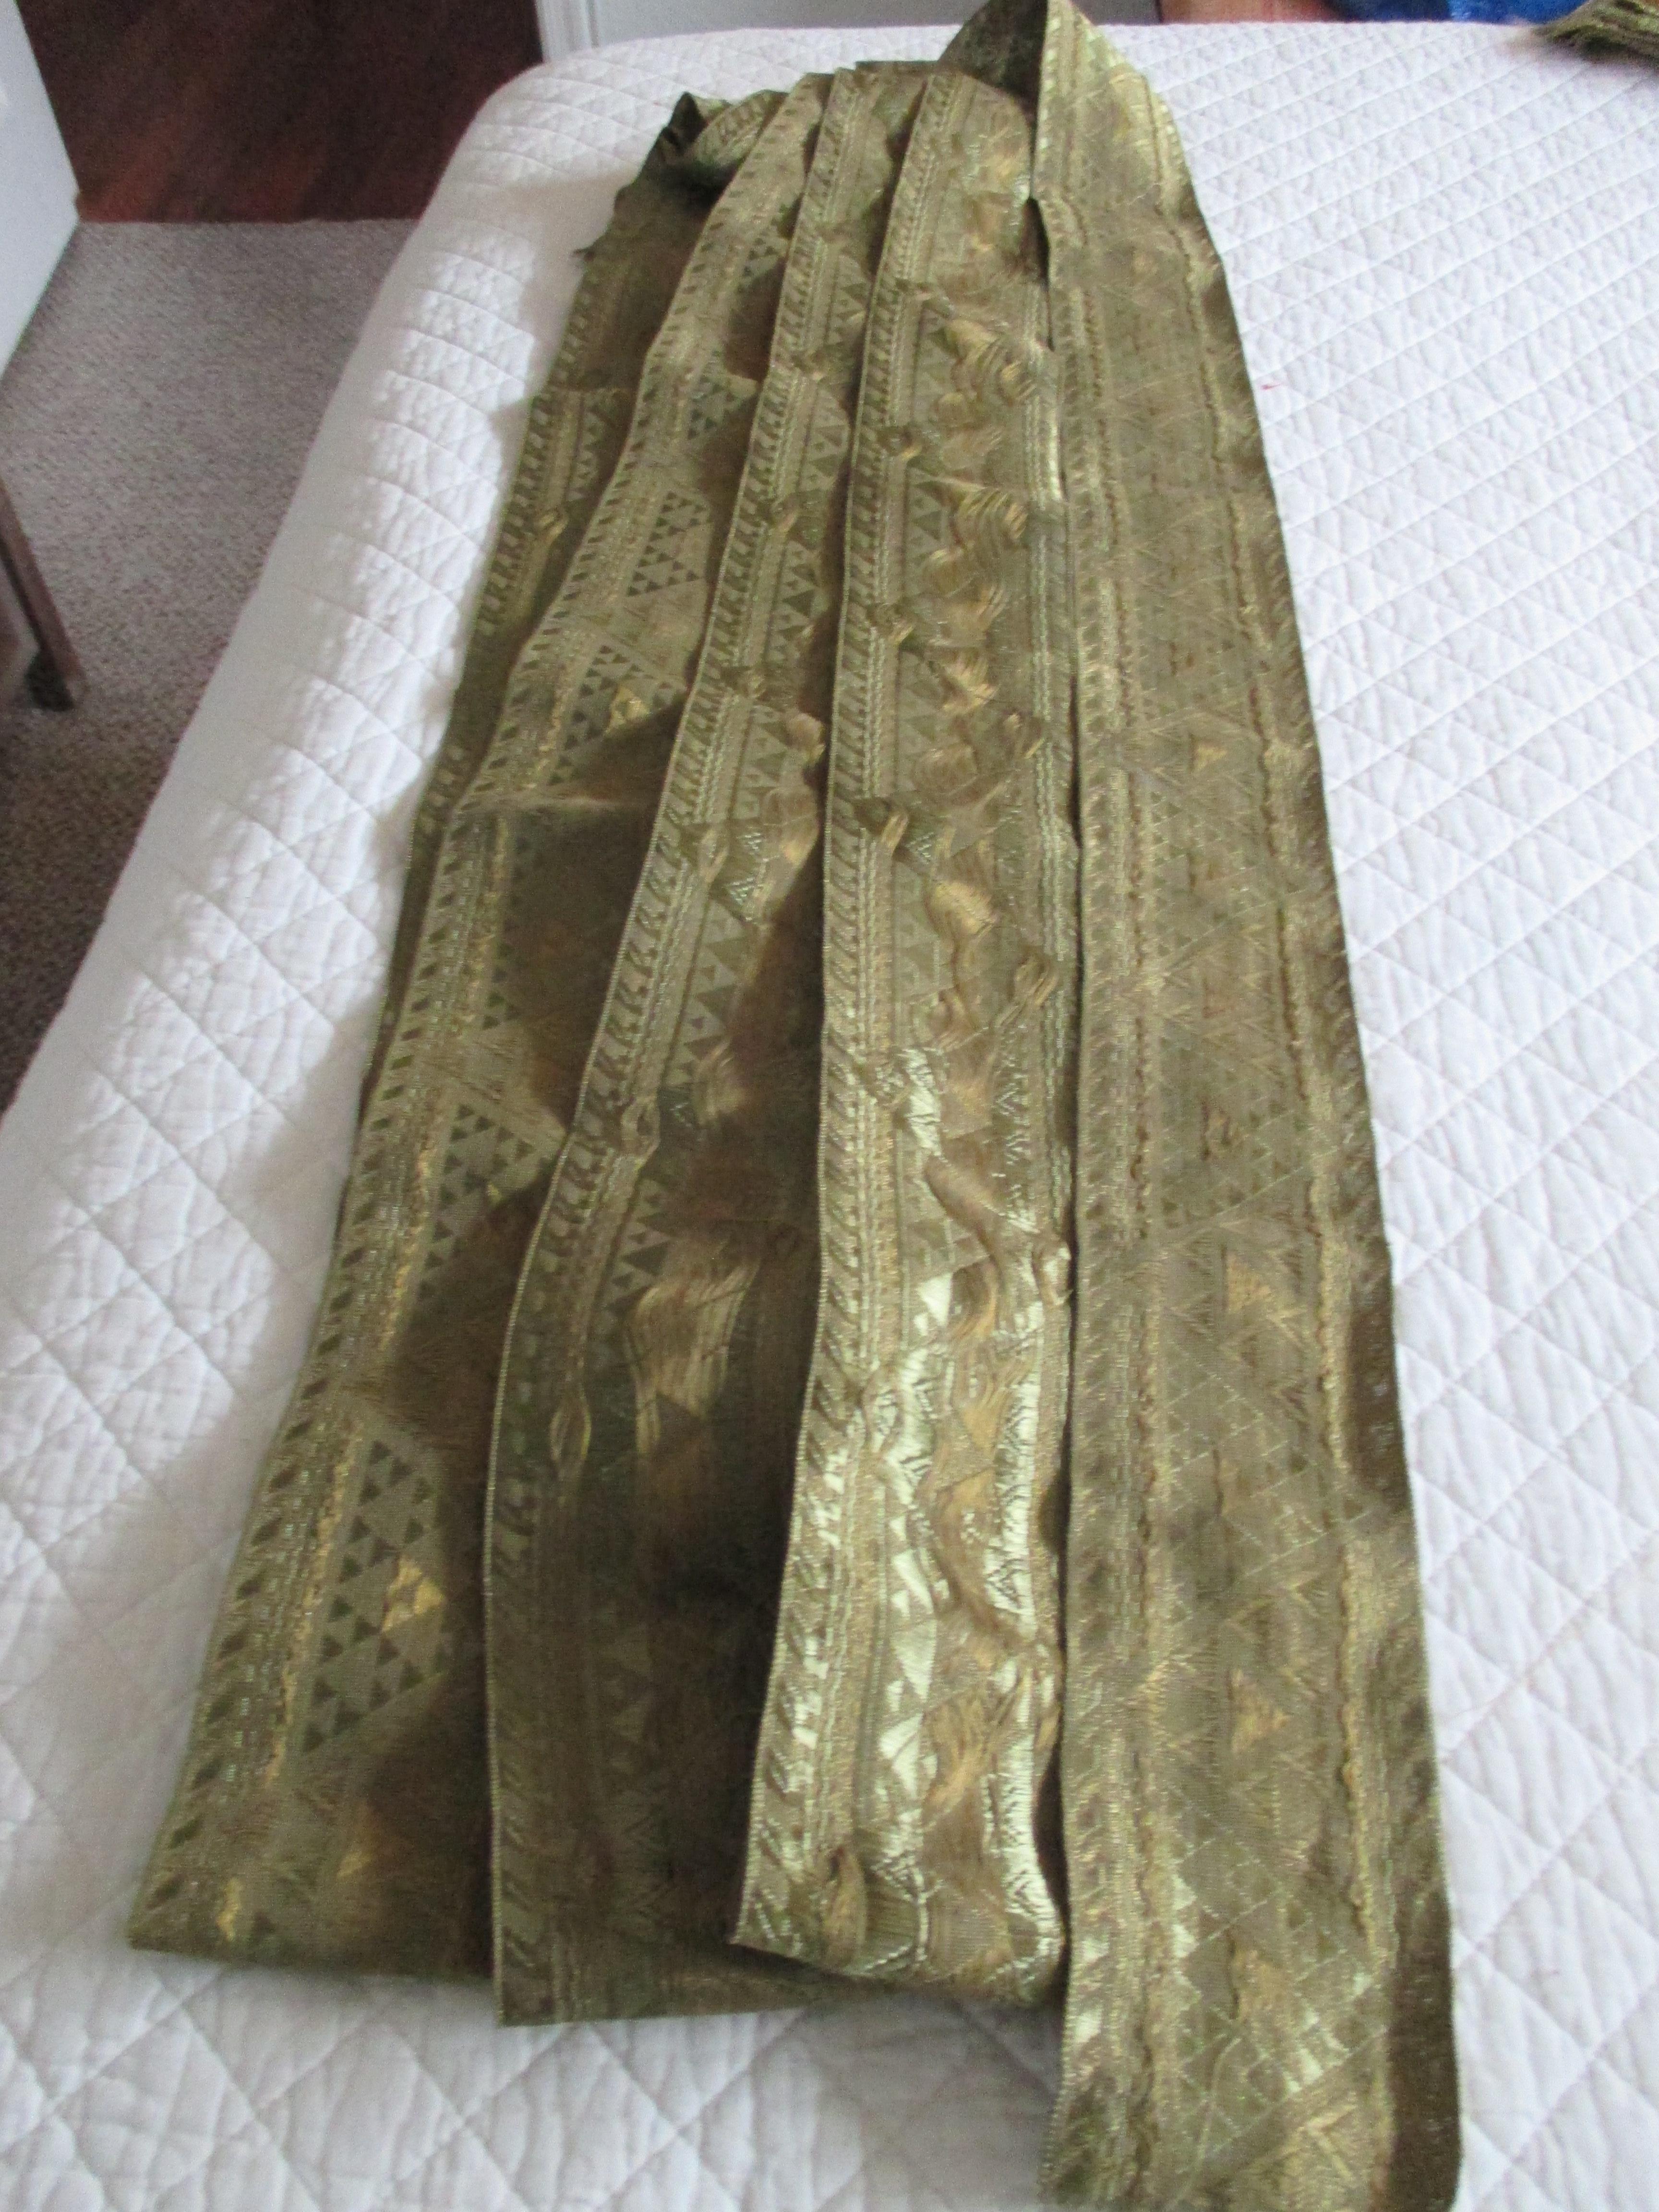 Antique metallic threads woven wide decorative trim.
Triangular design in moss green and gold threads.
Ideal for upholstery, curtain trim or pillows.
Size: 3.75